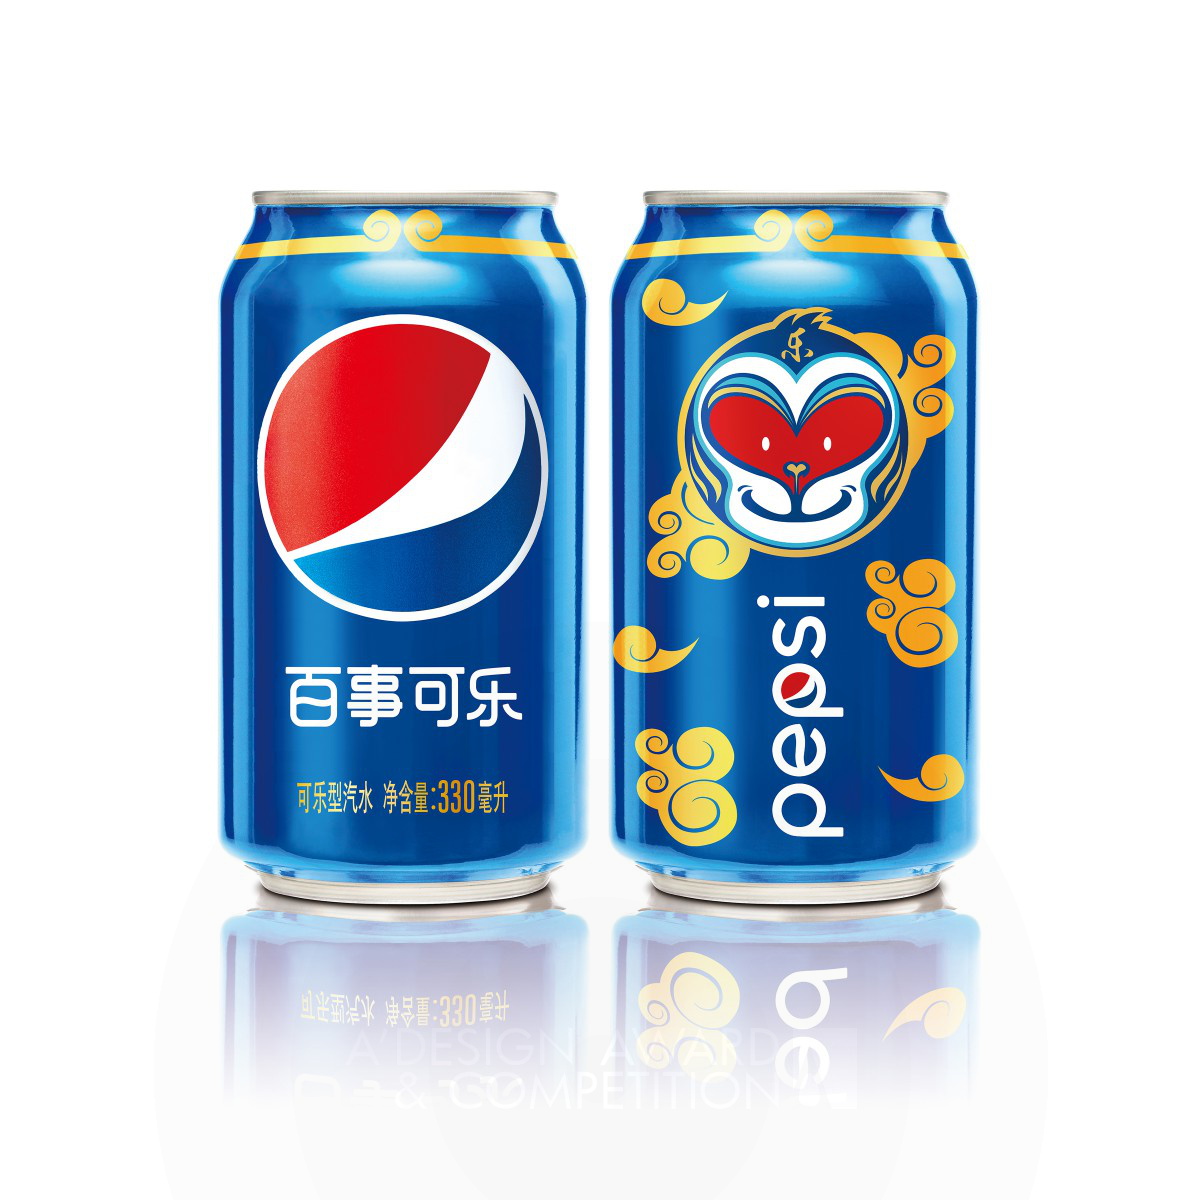 Pepsi Year of the Monkey Ltd Edition Can Aluminum Can by PepsiCo Design and Innovation